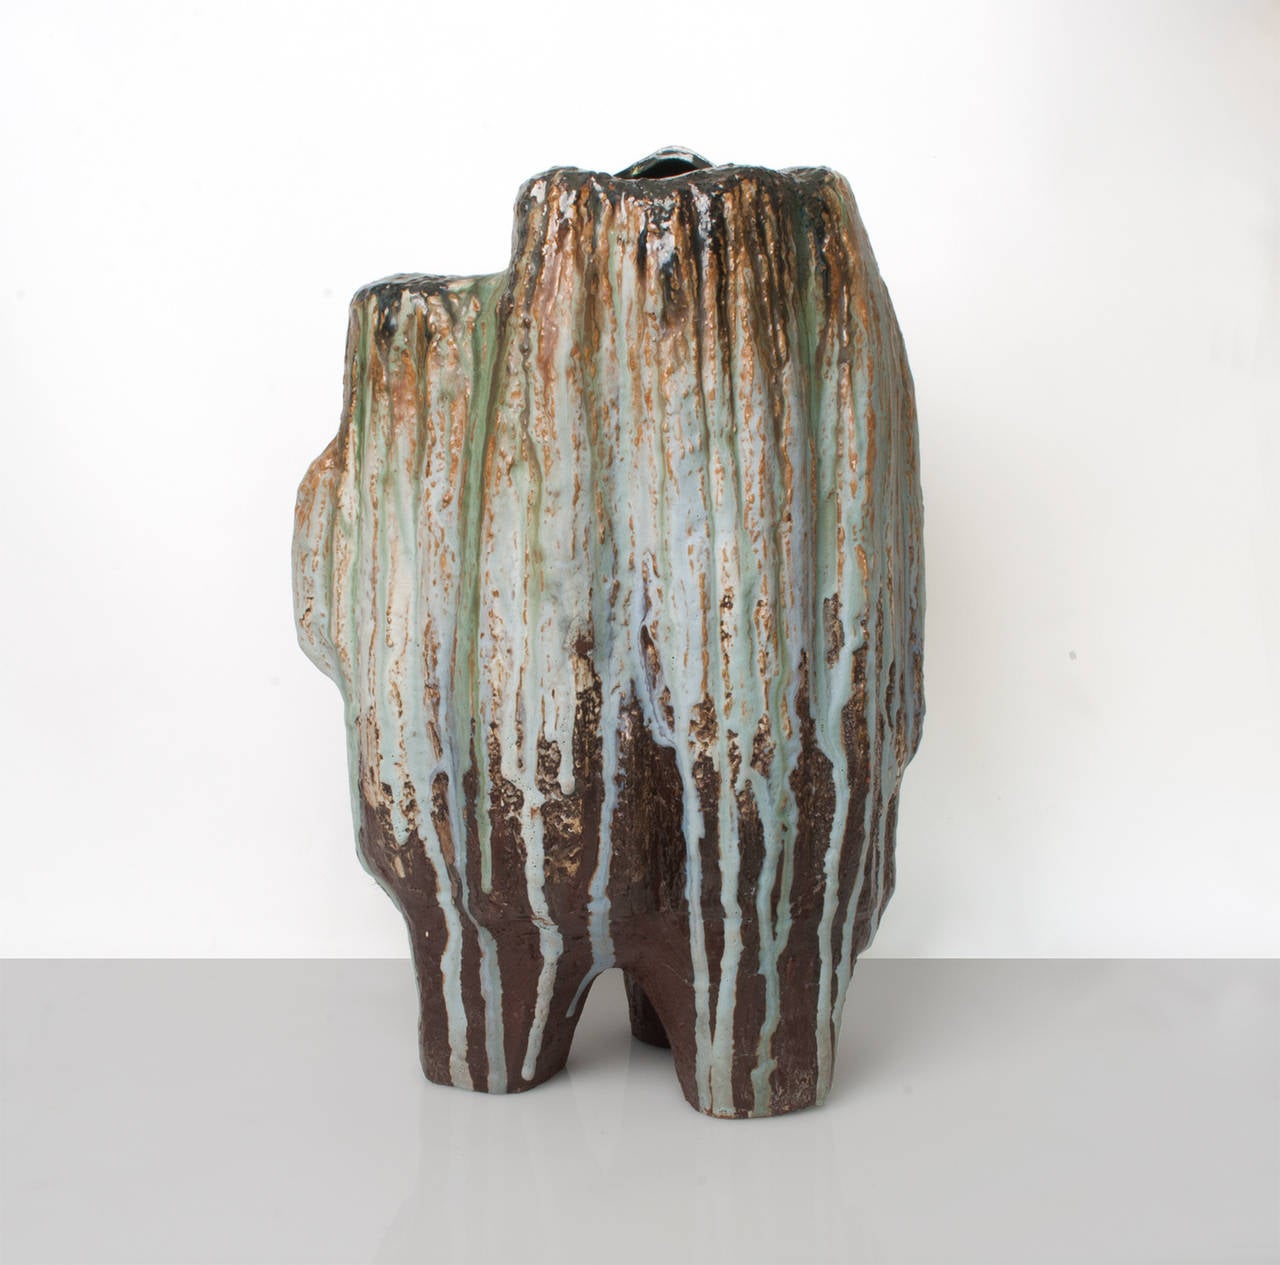 A monumental ceramic vase with a brown body on 3 points with a series of drip glazes by artist Helmut Friedrich Schäffenacker (1921 - 2010) whose workshop was located in Ulm, Germany, height: 20 